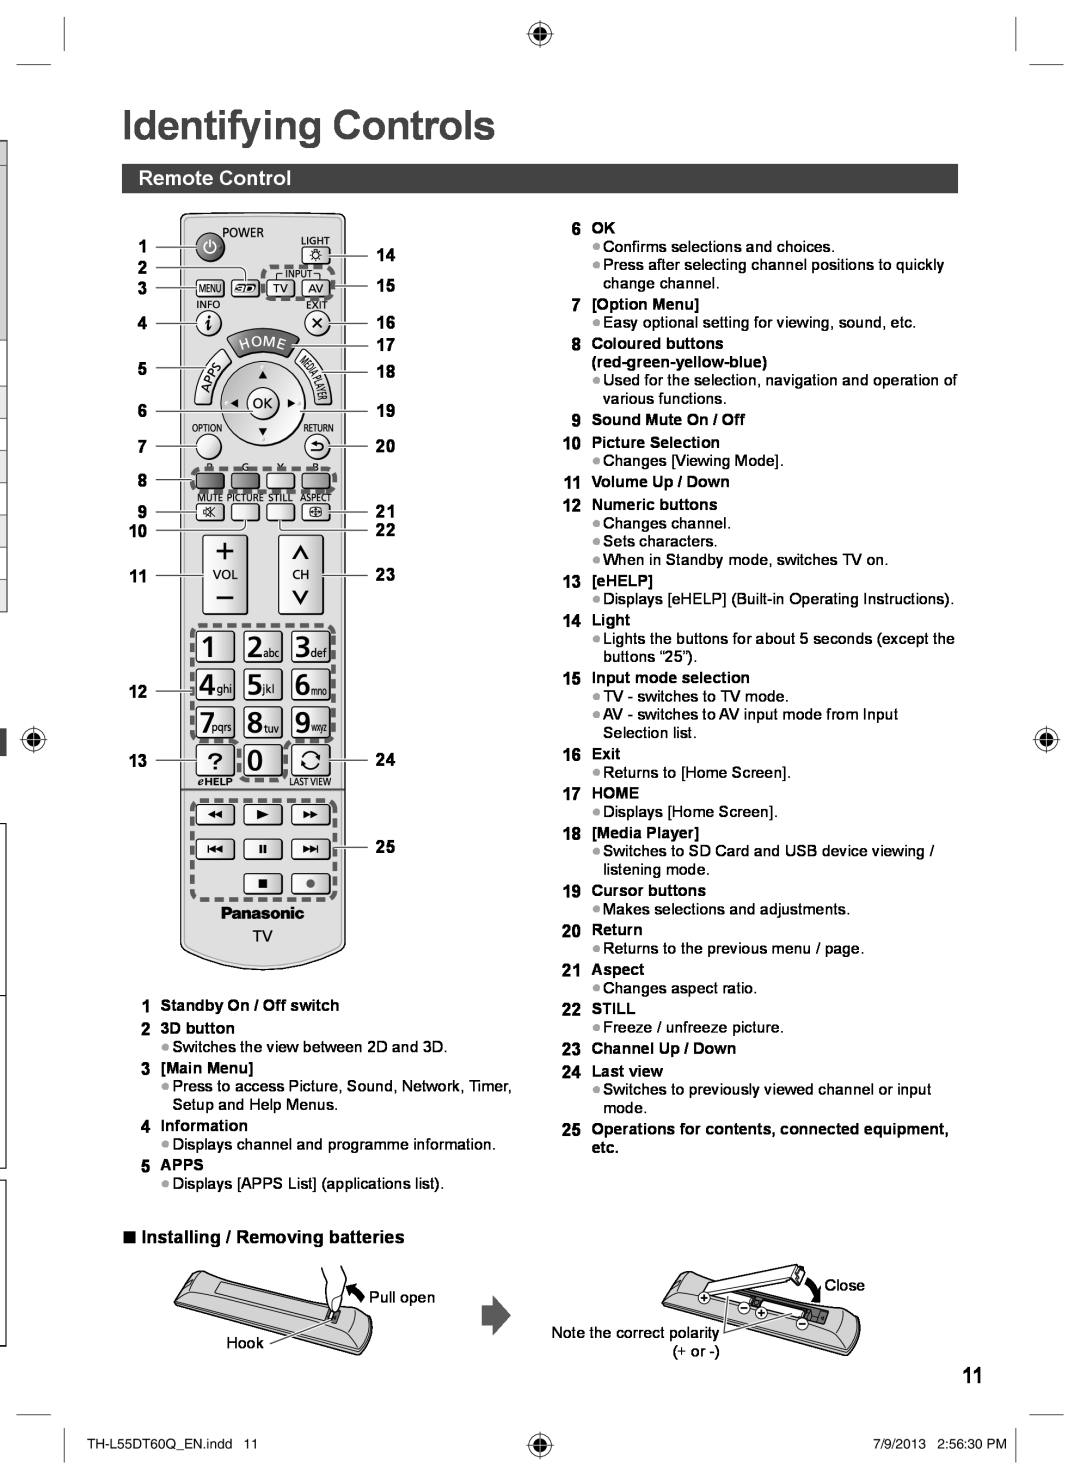 Panasonic TH-L55DT60Q operating instructions Identifying Controls, Remote Control, Installing / Removing batteries 